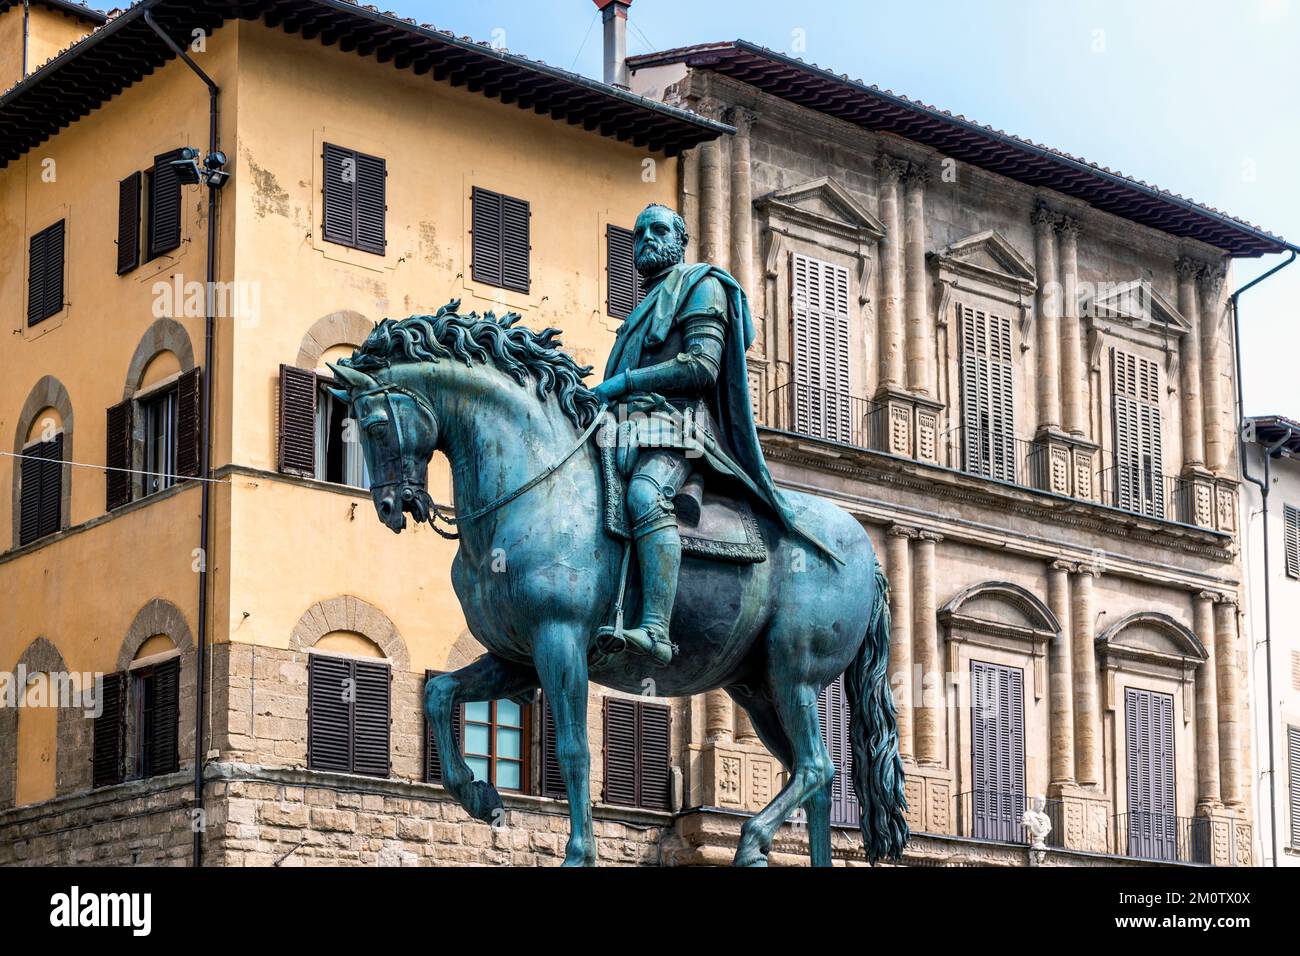 Equestrian monument of Cosimo I, bronze statue sculpted by Giambologna and erected in 1594, located in Signoria square, Florence, Tuscany, Italy Stock Photo